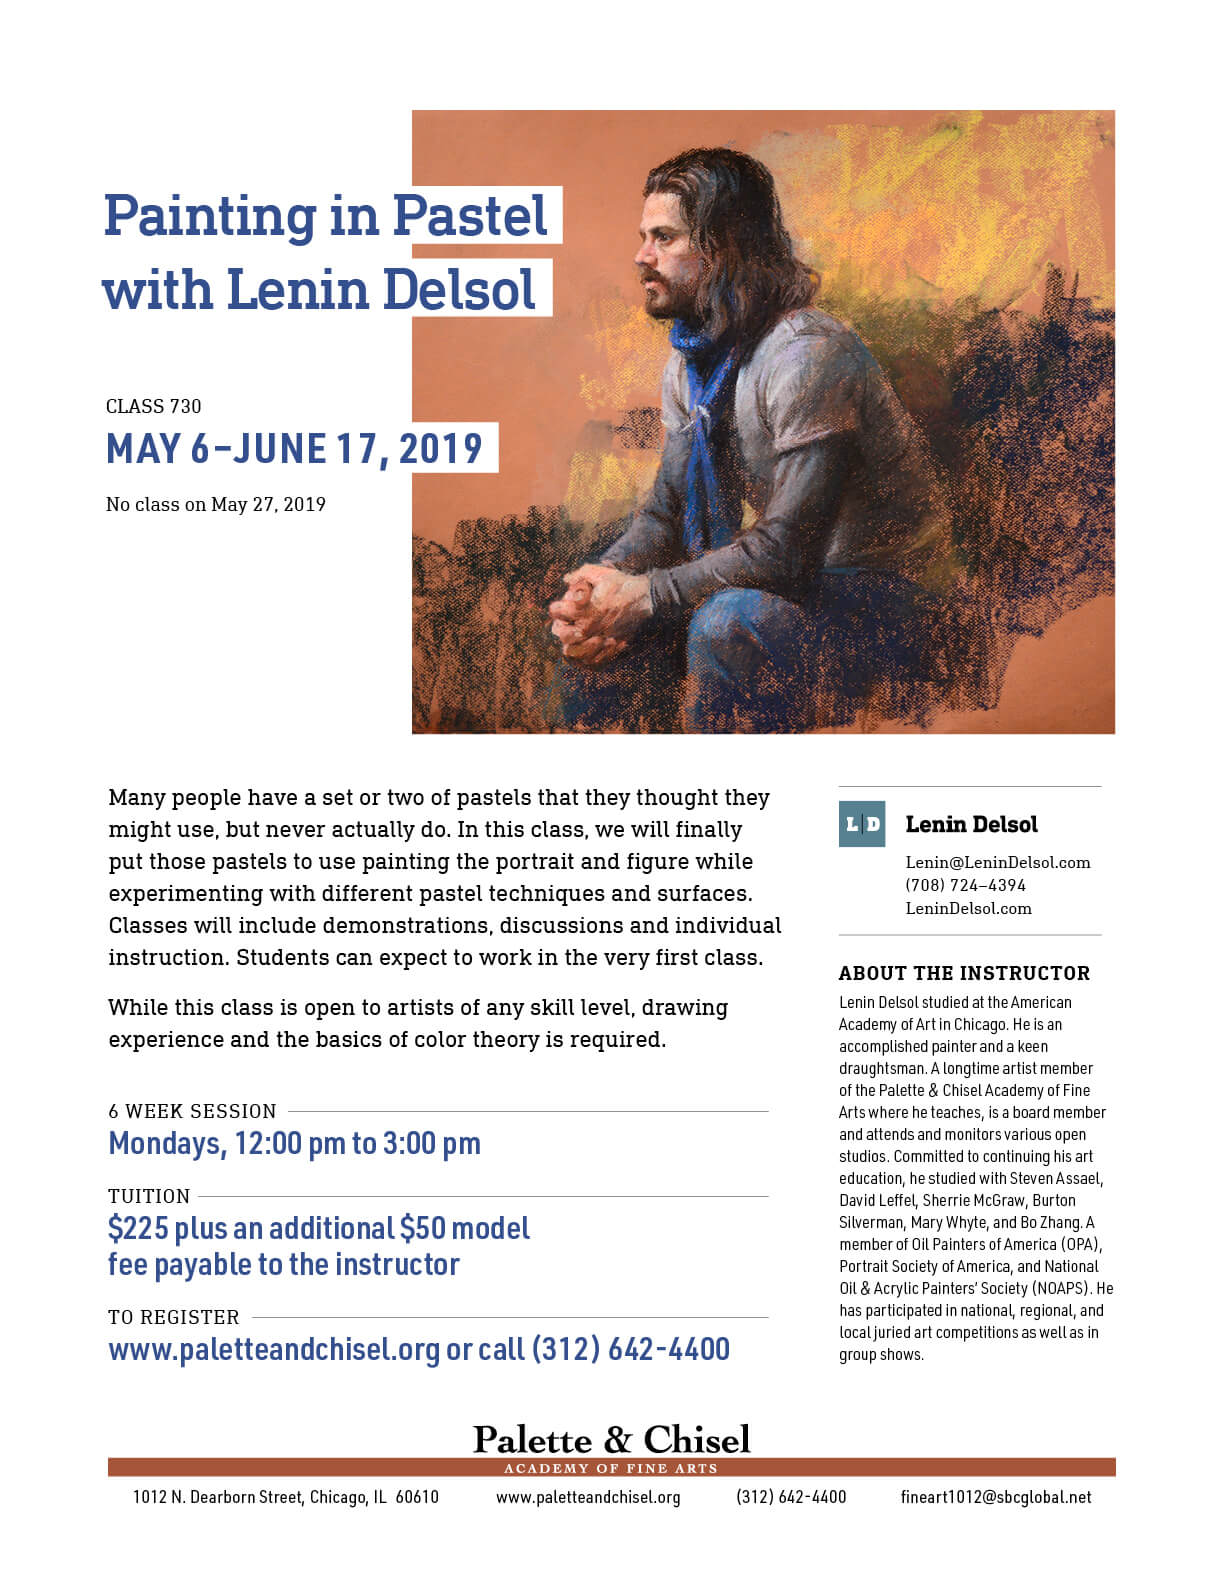 Painting in Pastel with Lenin Delsol Class flyer